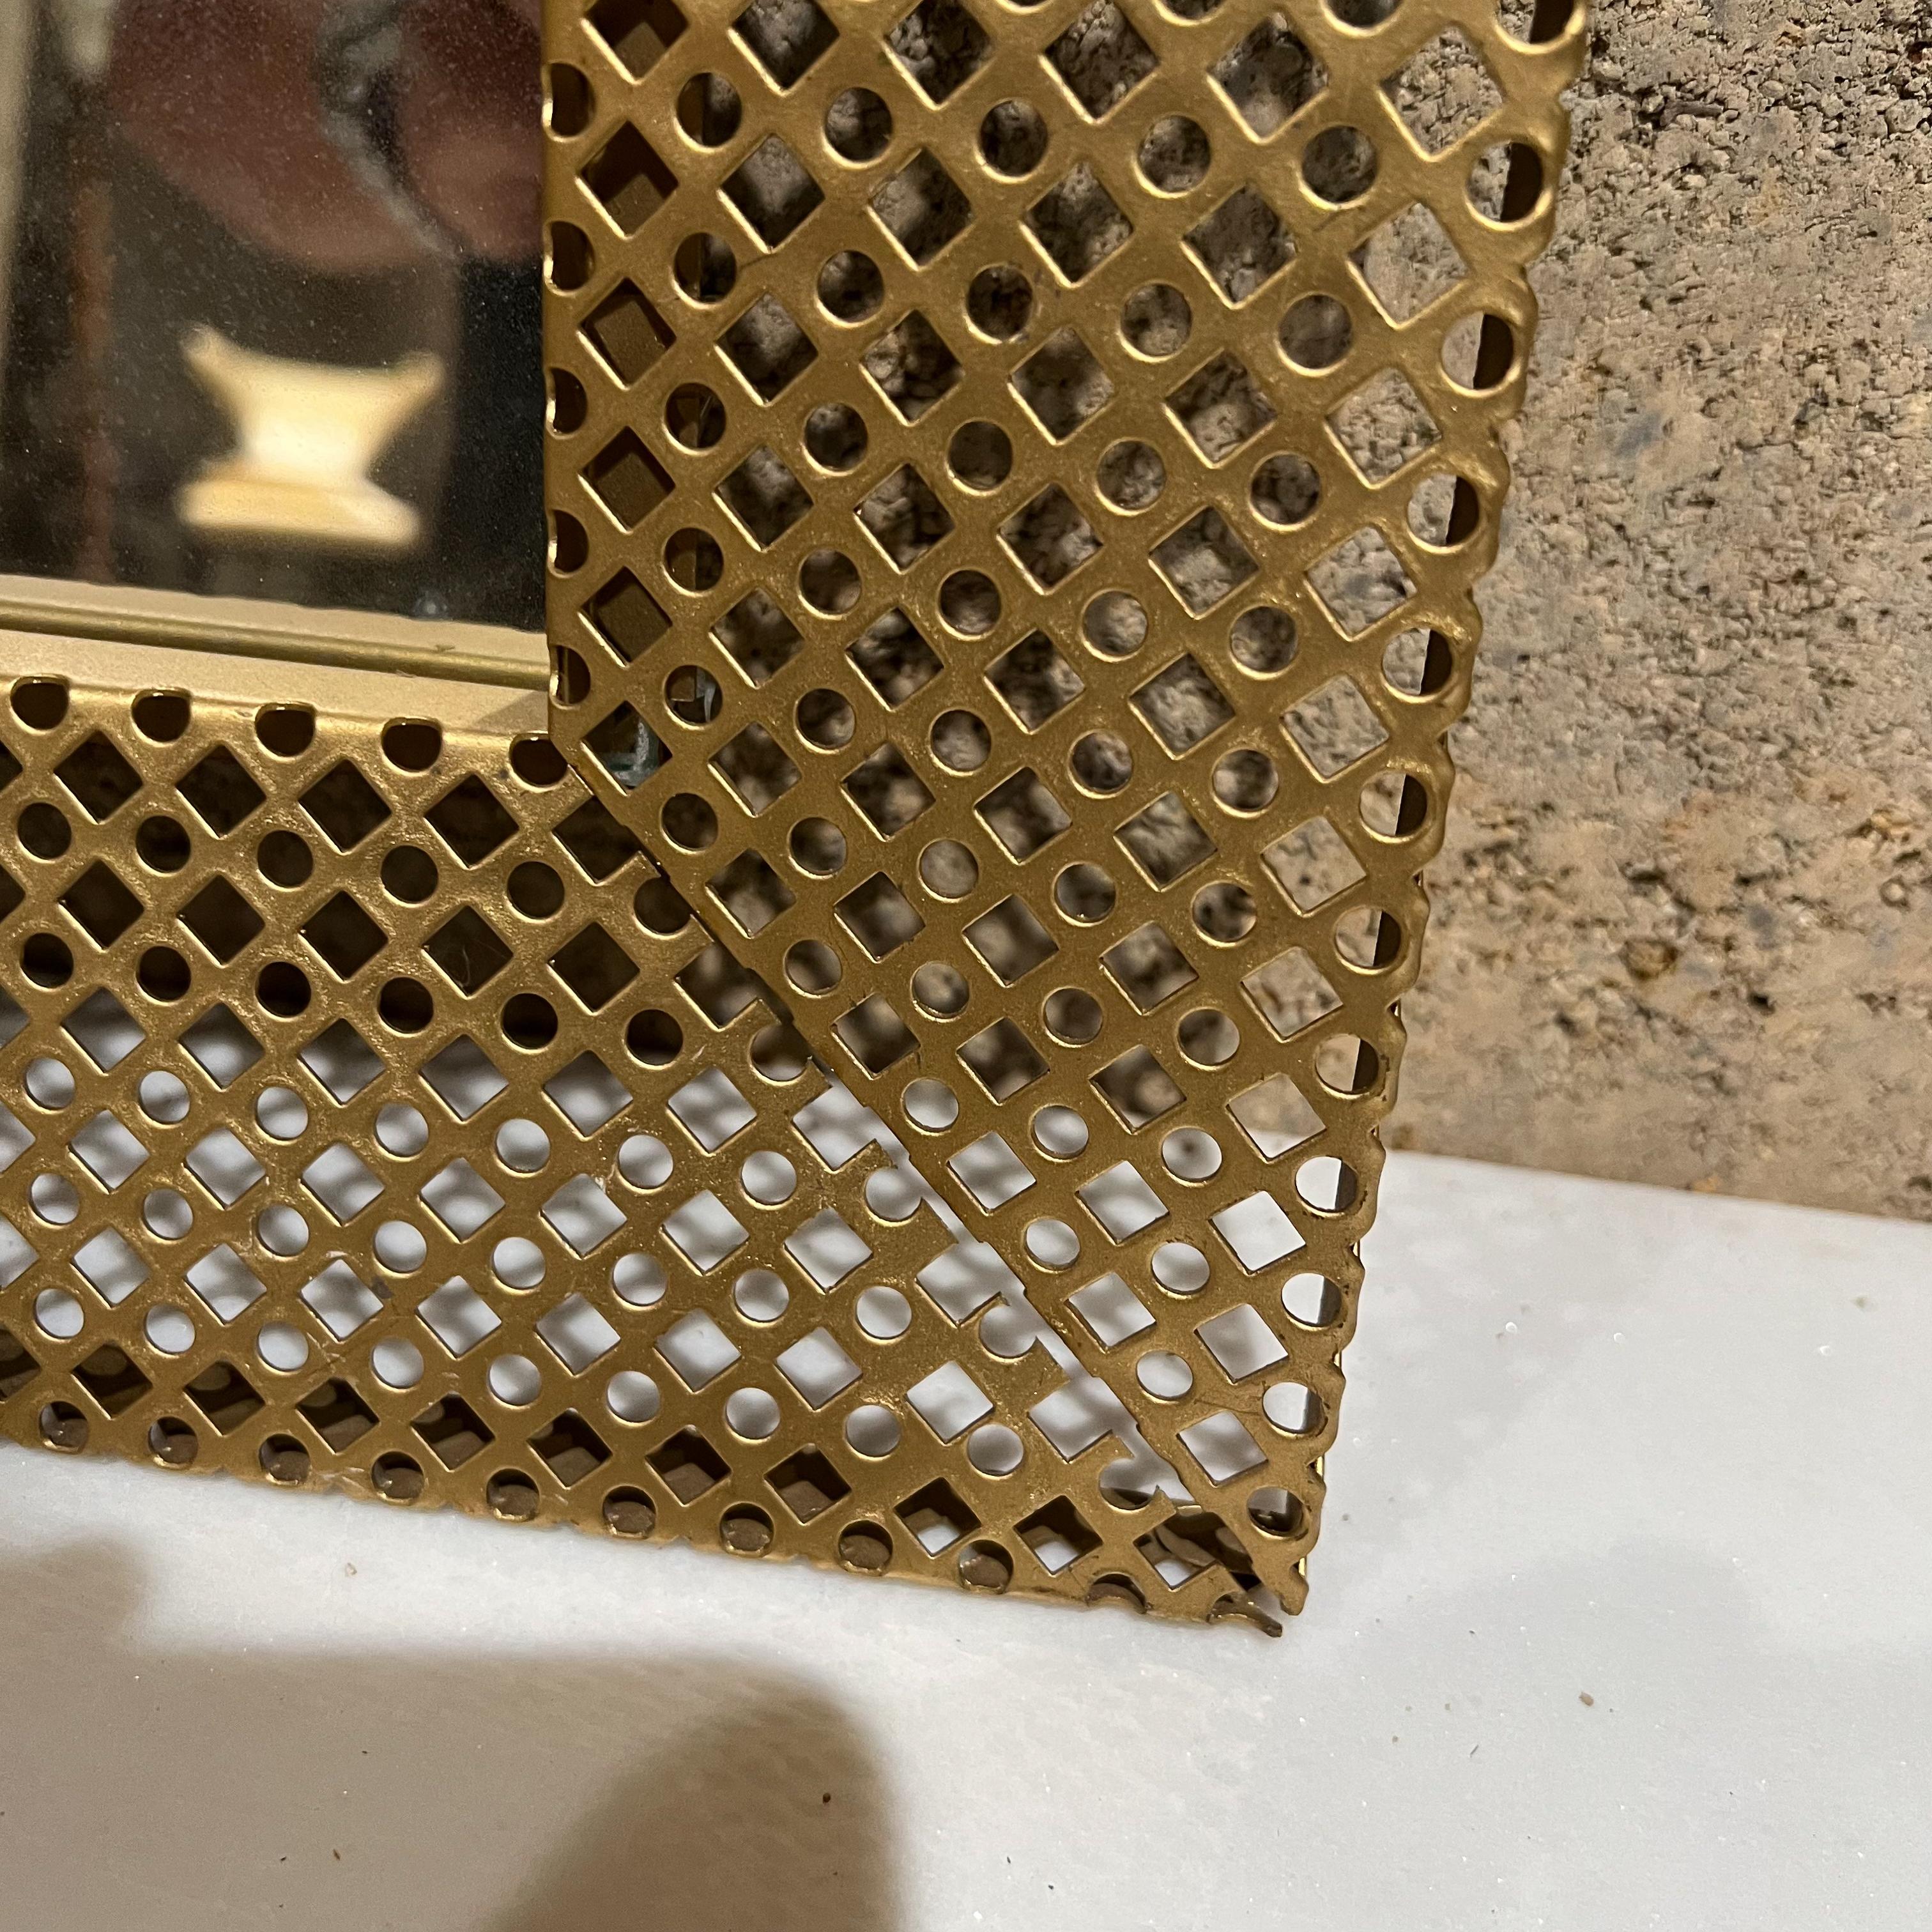 Italian vintage perforated gold metal mirror picture frame Italy 1950s 
In the style of Mathieu Mategot renowned French material artist
Measures: 14.63 x 12 W x 1.5 D
Original Preowned Vintage unrestored condition.
See images provided.


